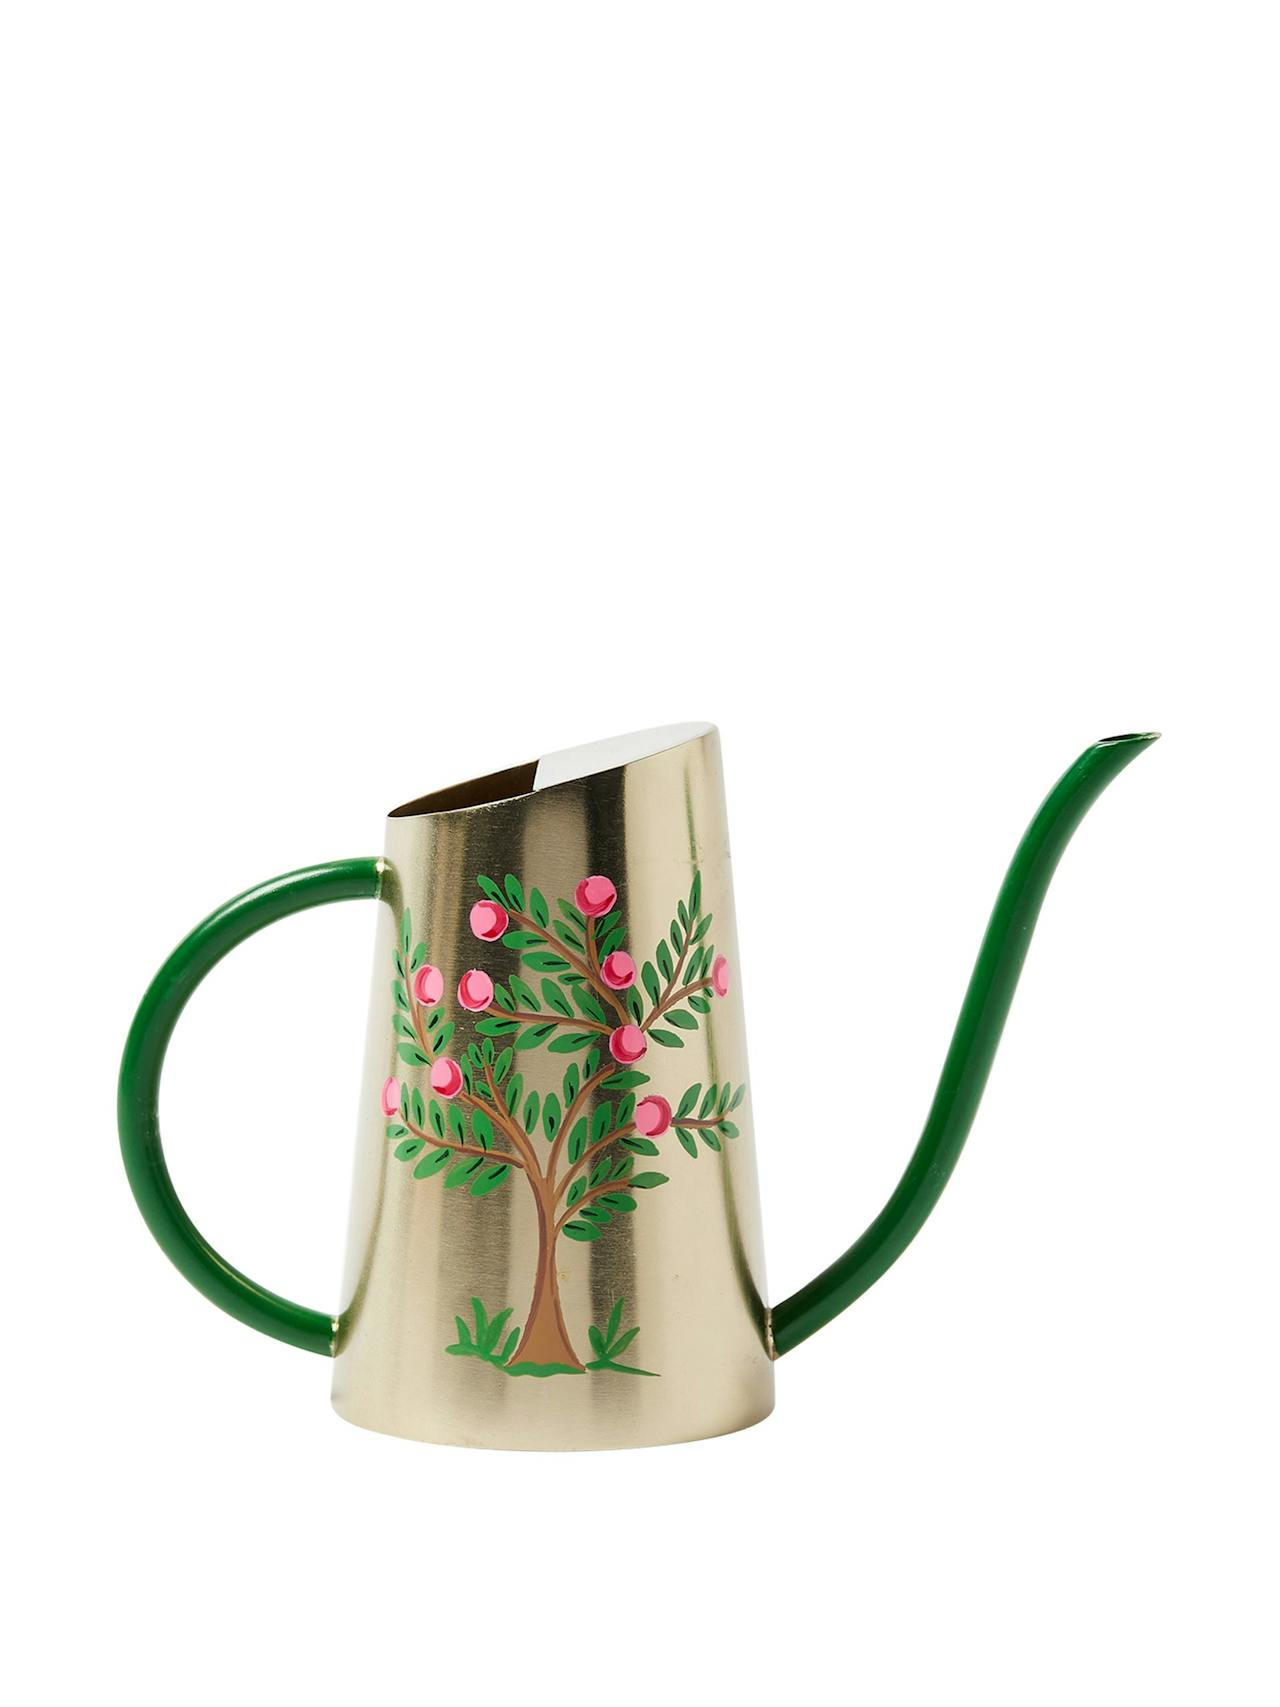 Painted tree gold metal watering can